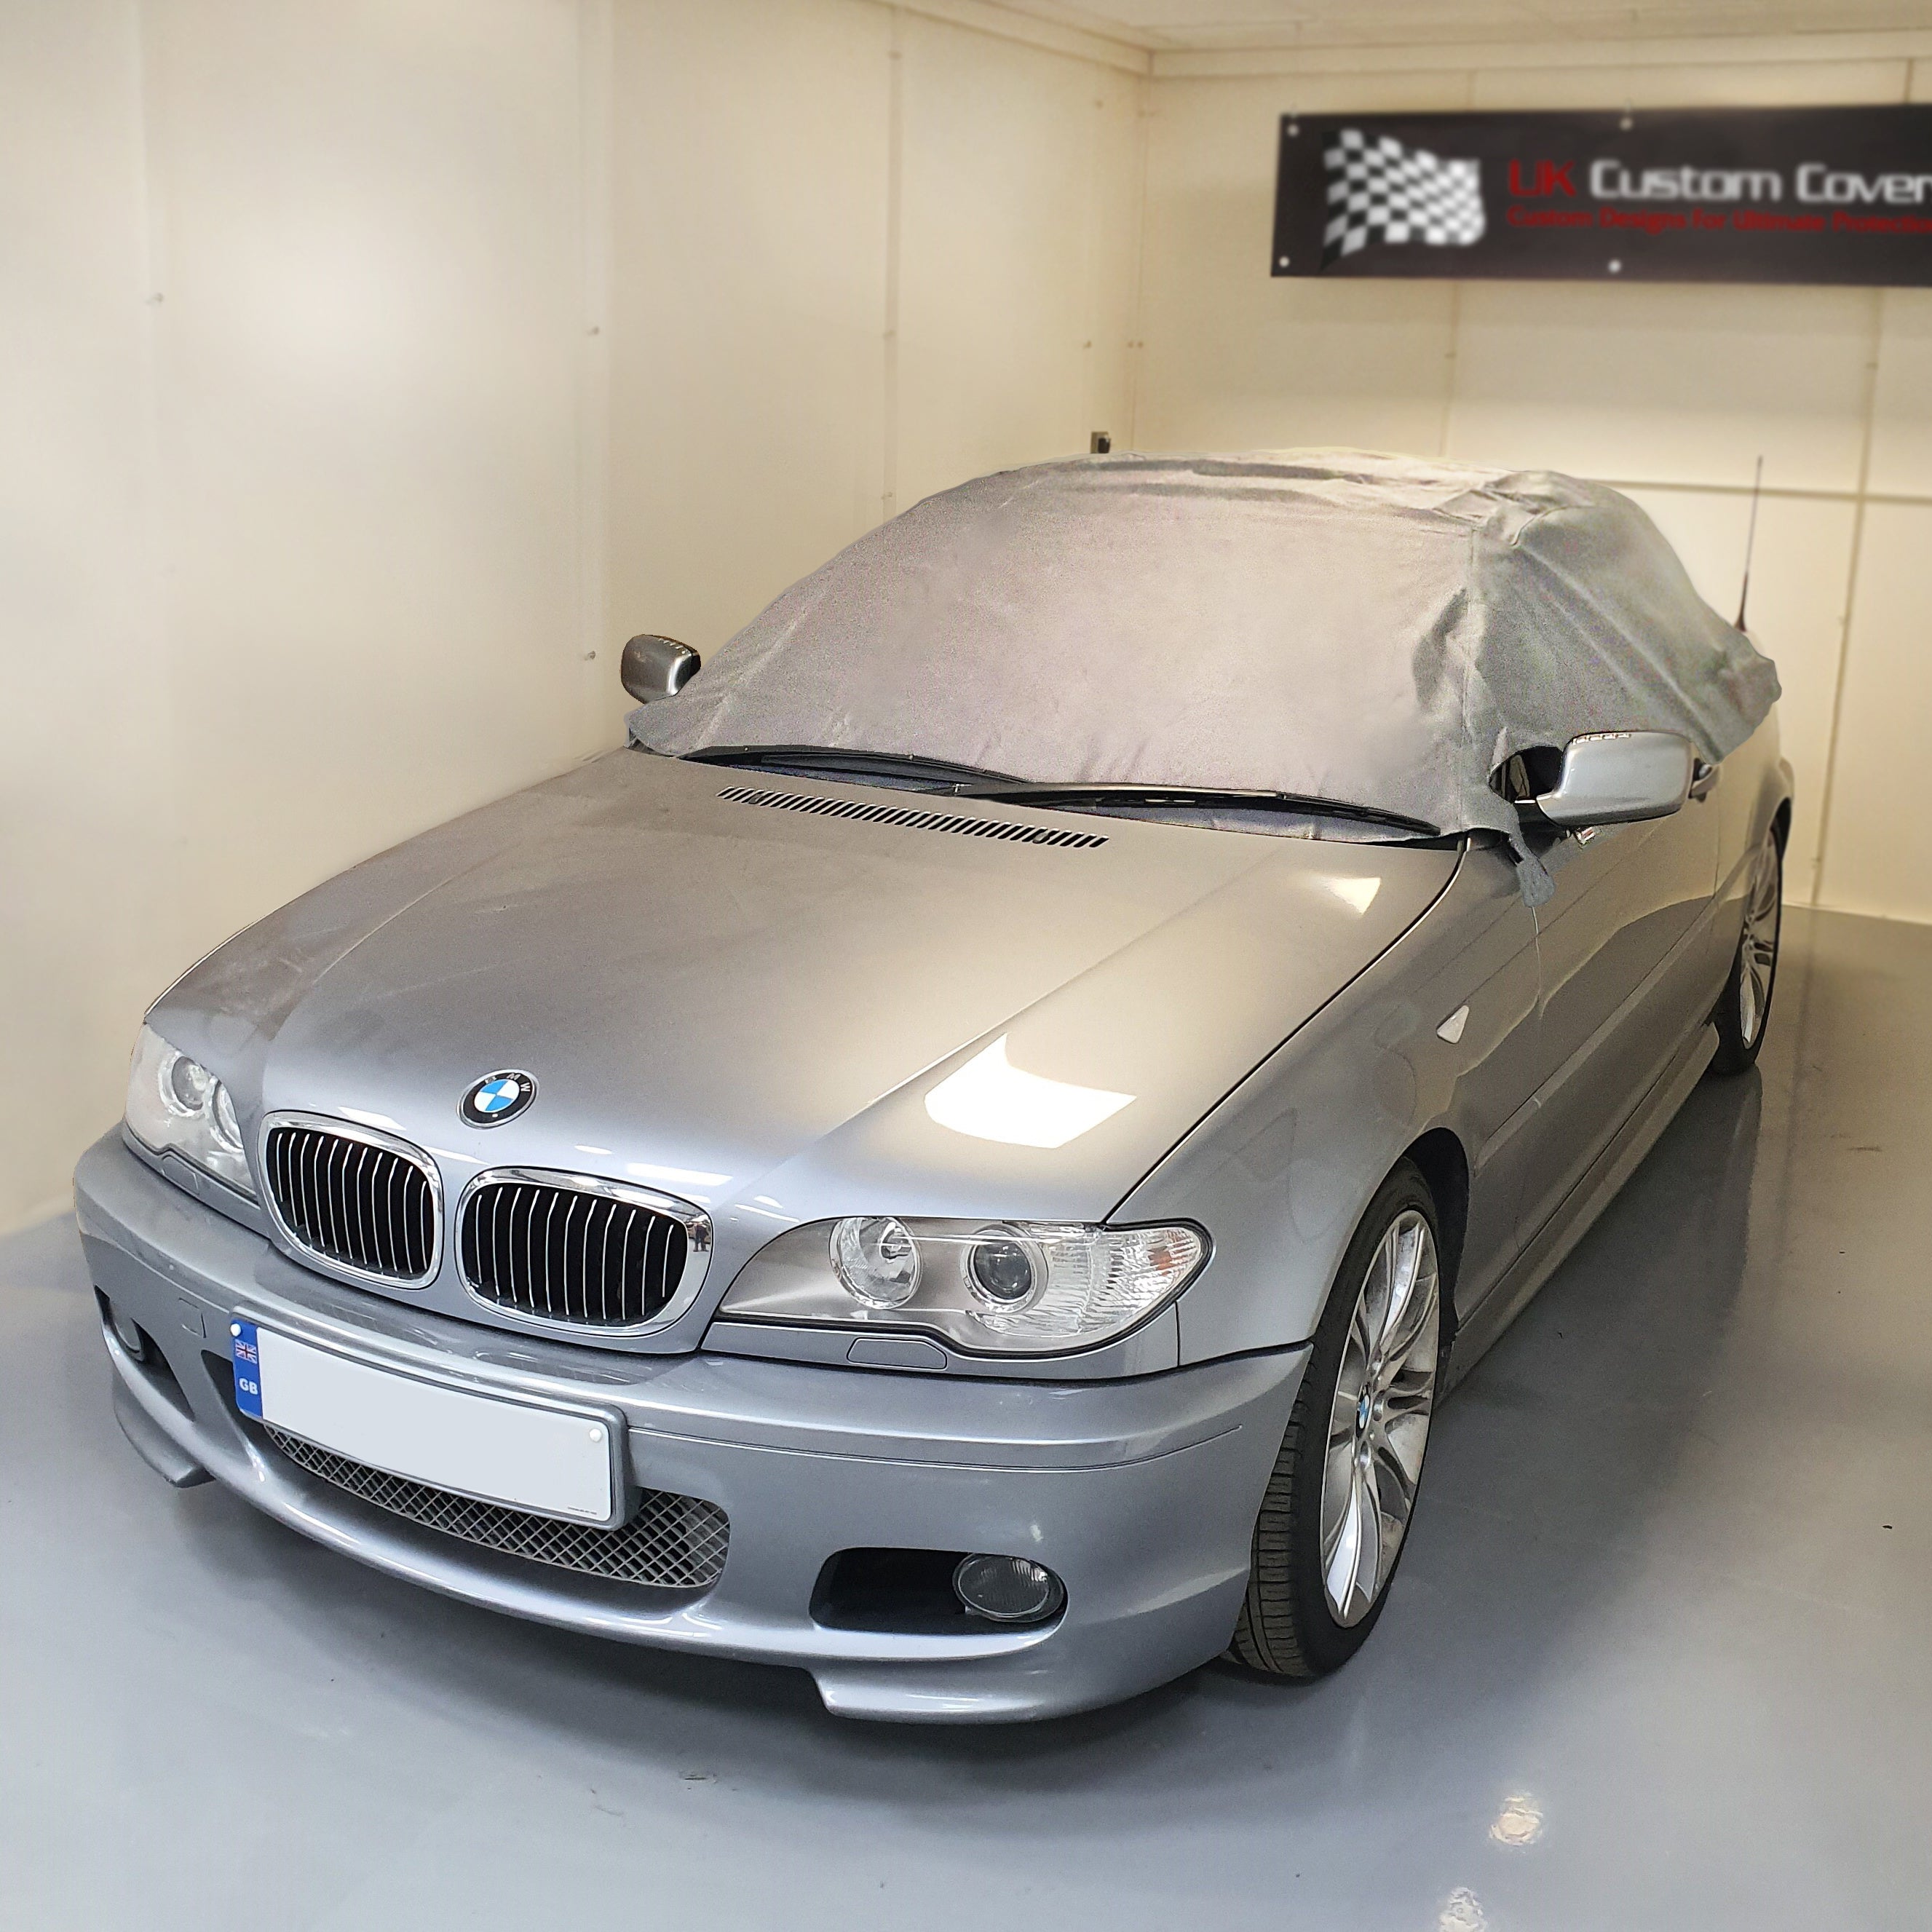 Soft Top Roof Half Cover for BMW E46 - 1999 to 2005 (571G) - GREY